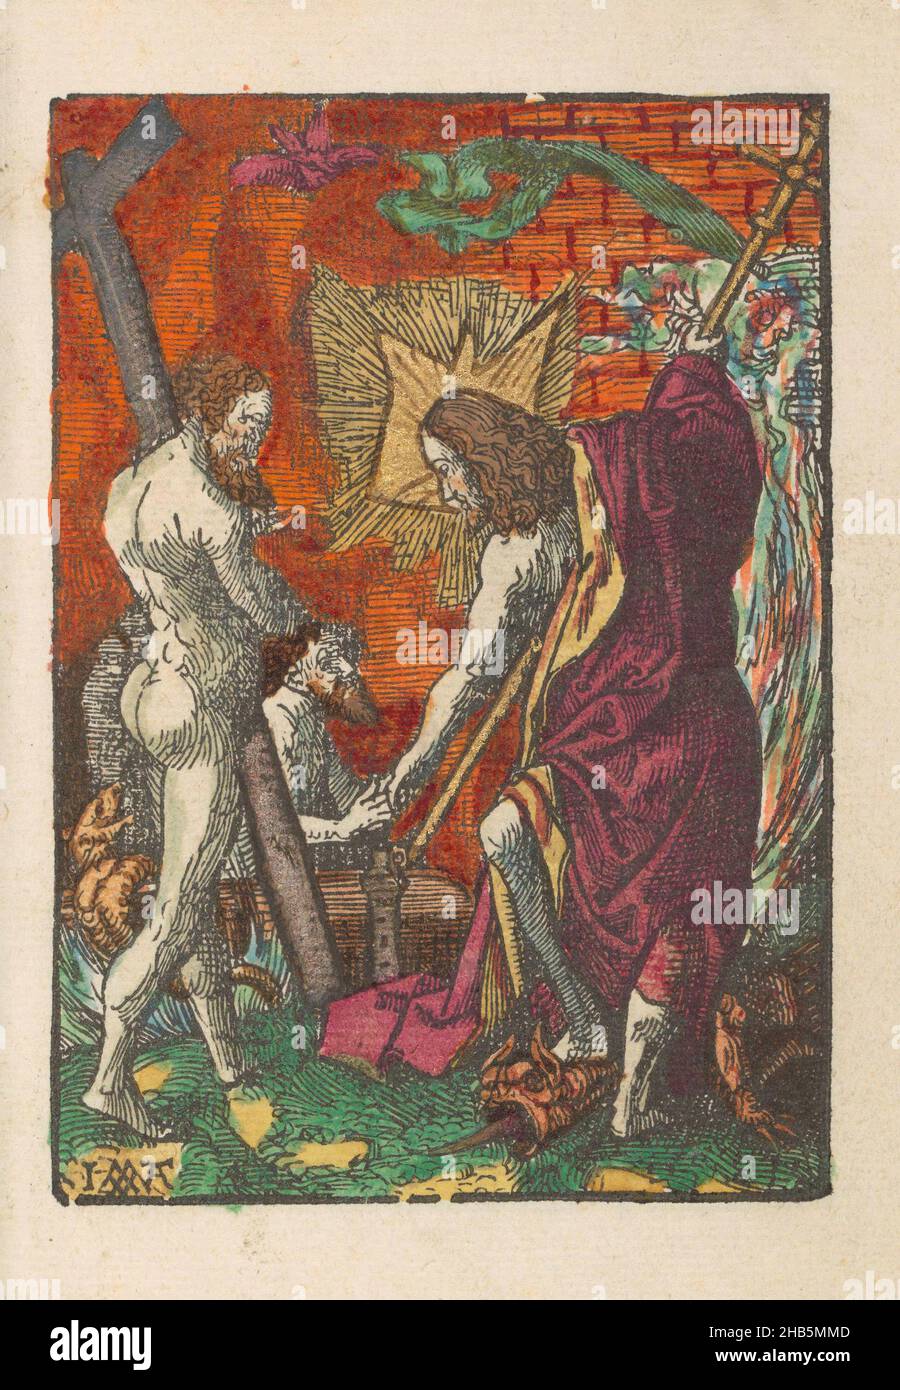 Christ in Limbo, The Little Passion (series title), Stupid Passion (series title), Christ descends into limbo with a cross staff in hand and saves souls. Print is part of a book., print maker: Jacob Cornelisz van Oostsanen (mentioned on object), publisher: Doen Pietersz., Amsterdam,  1520 - 1521 and/or c. 1530, paper, height 112 mm × width 78 mmheight 159 mm × width 101 mm Stock Photo